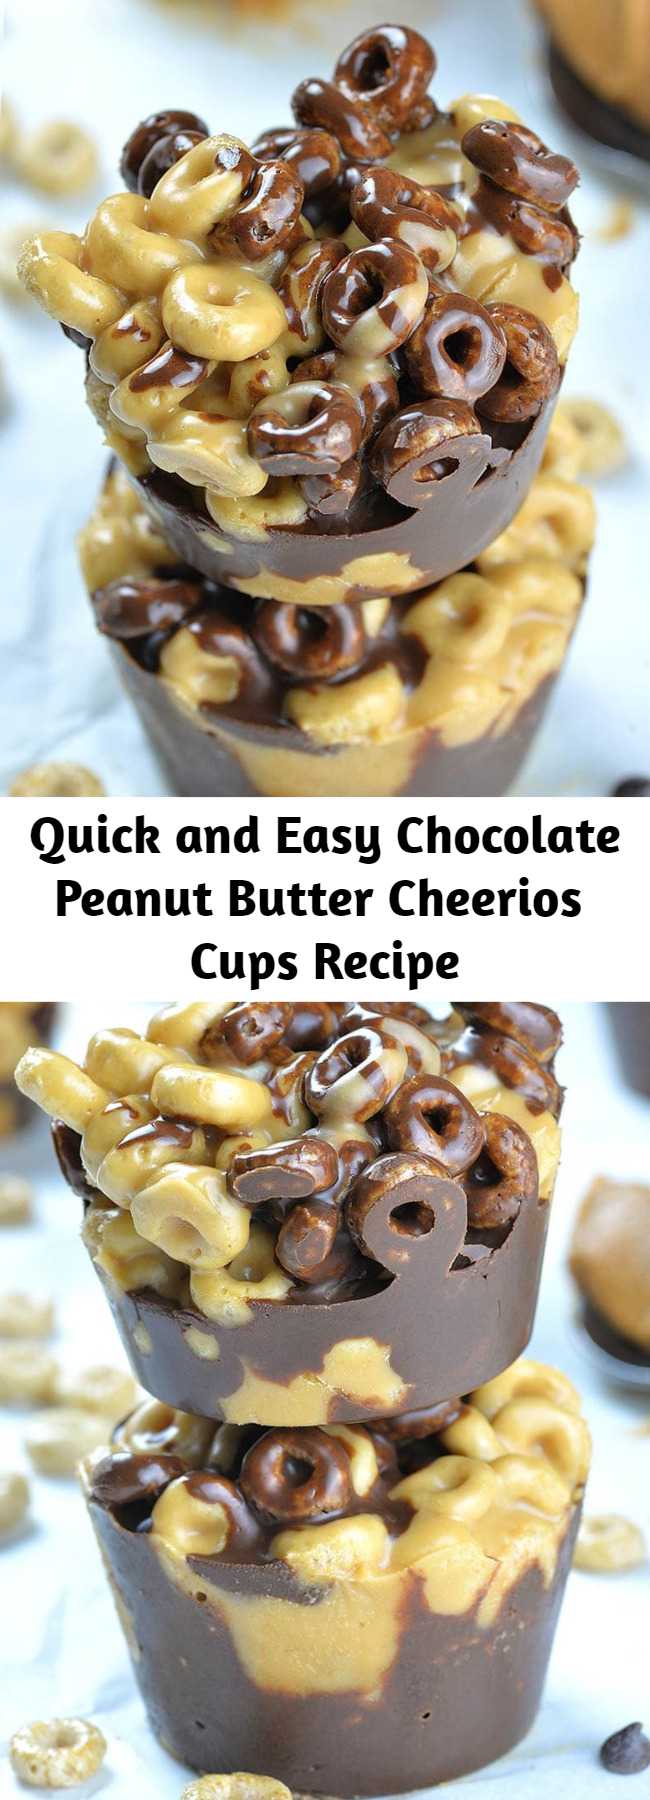 Quick and Easy Chocolate Peanut Butter Cheerios Cups Recipe - These quick and easy Chocolate Peanut Butter Cheerios Cups are made with only 5 healthy ingredients. Completely no bake and could be made in 15 minutes or less. #snack #healthysnack #chocolate #peanutbutter #cheerious